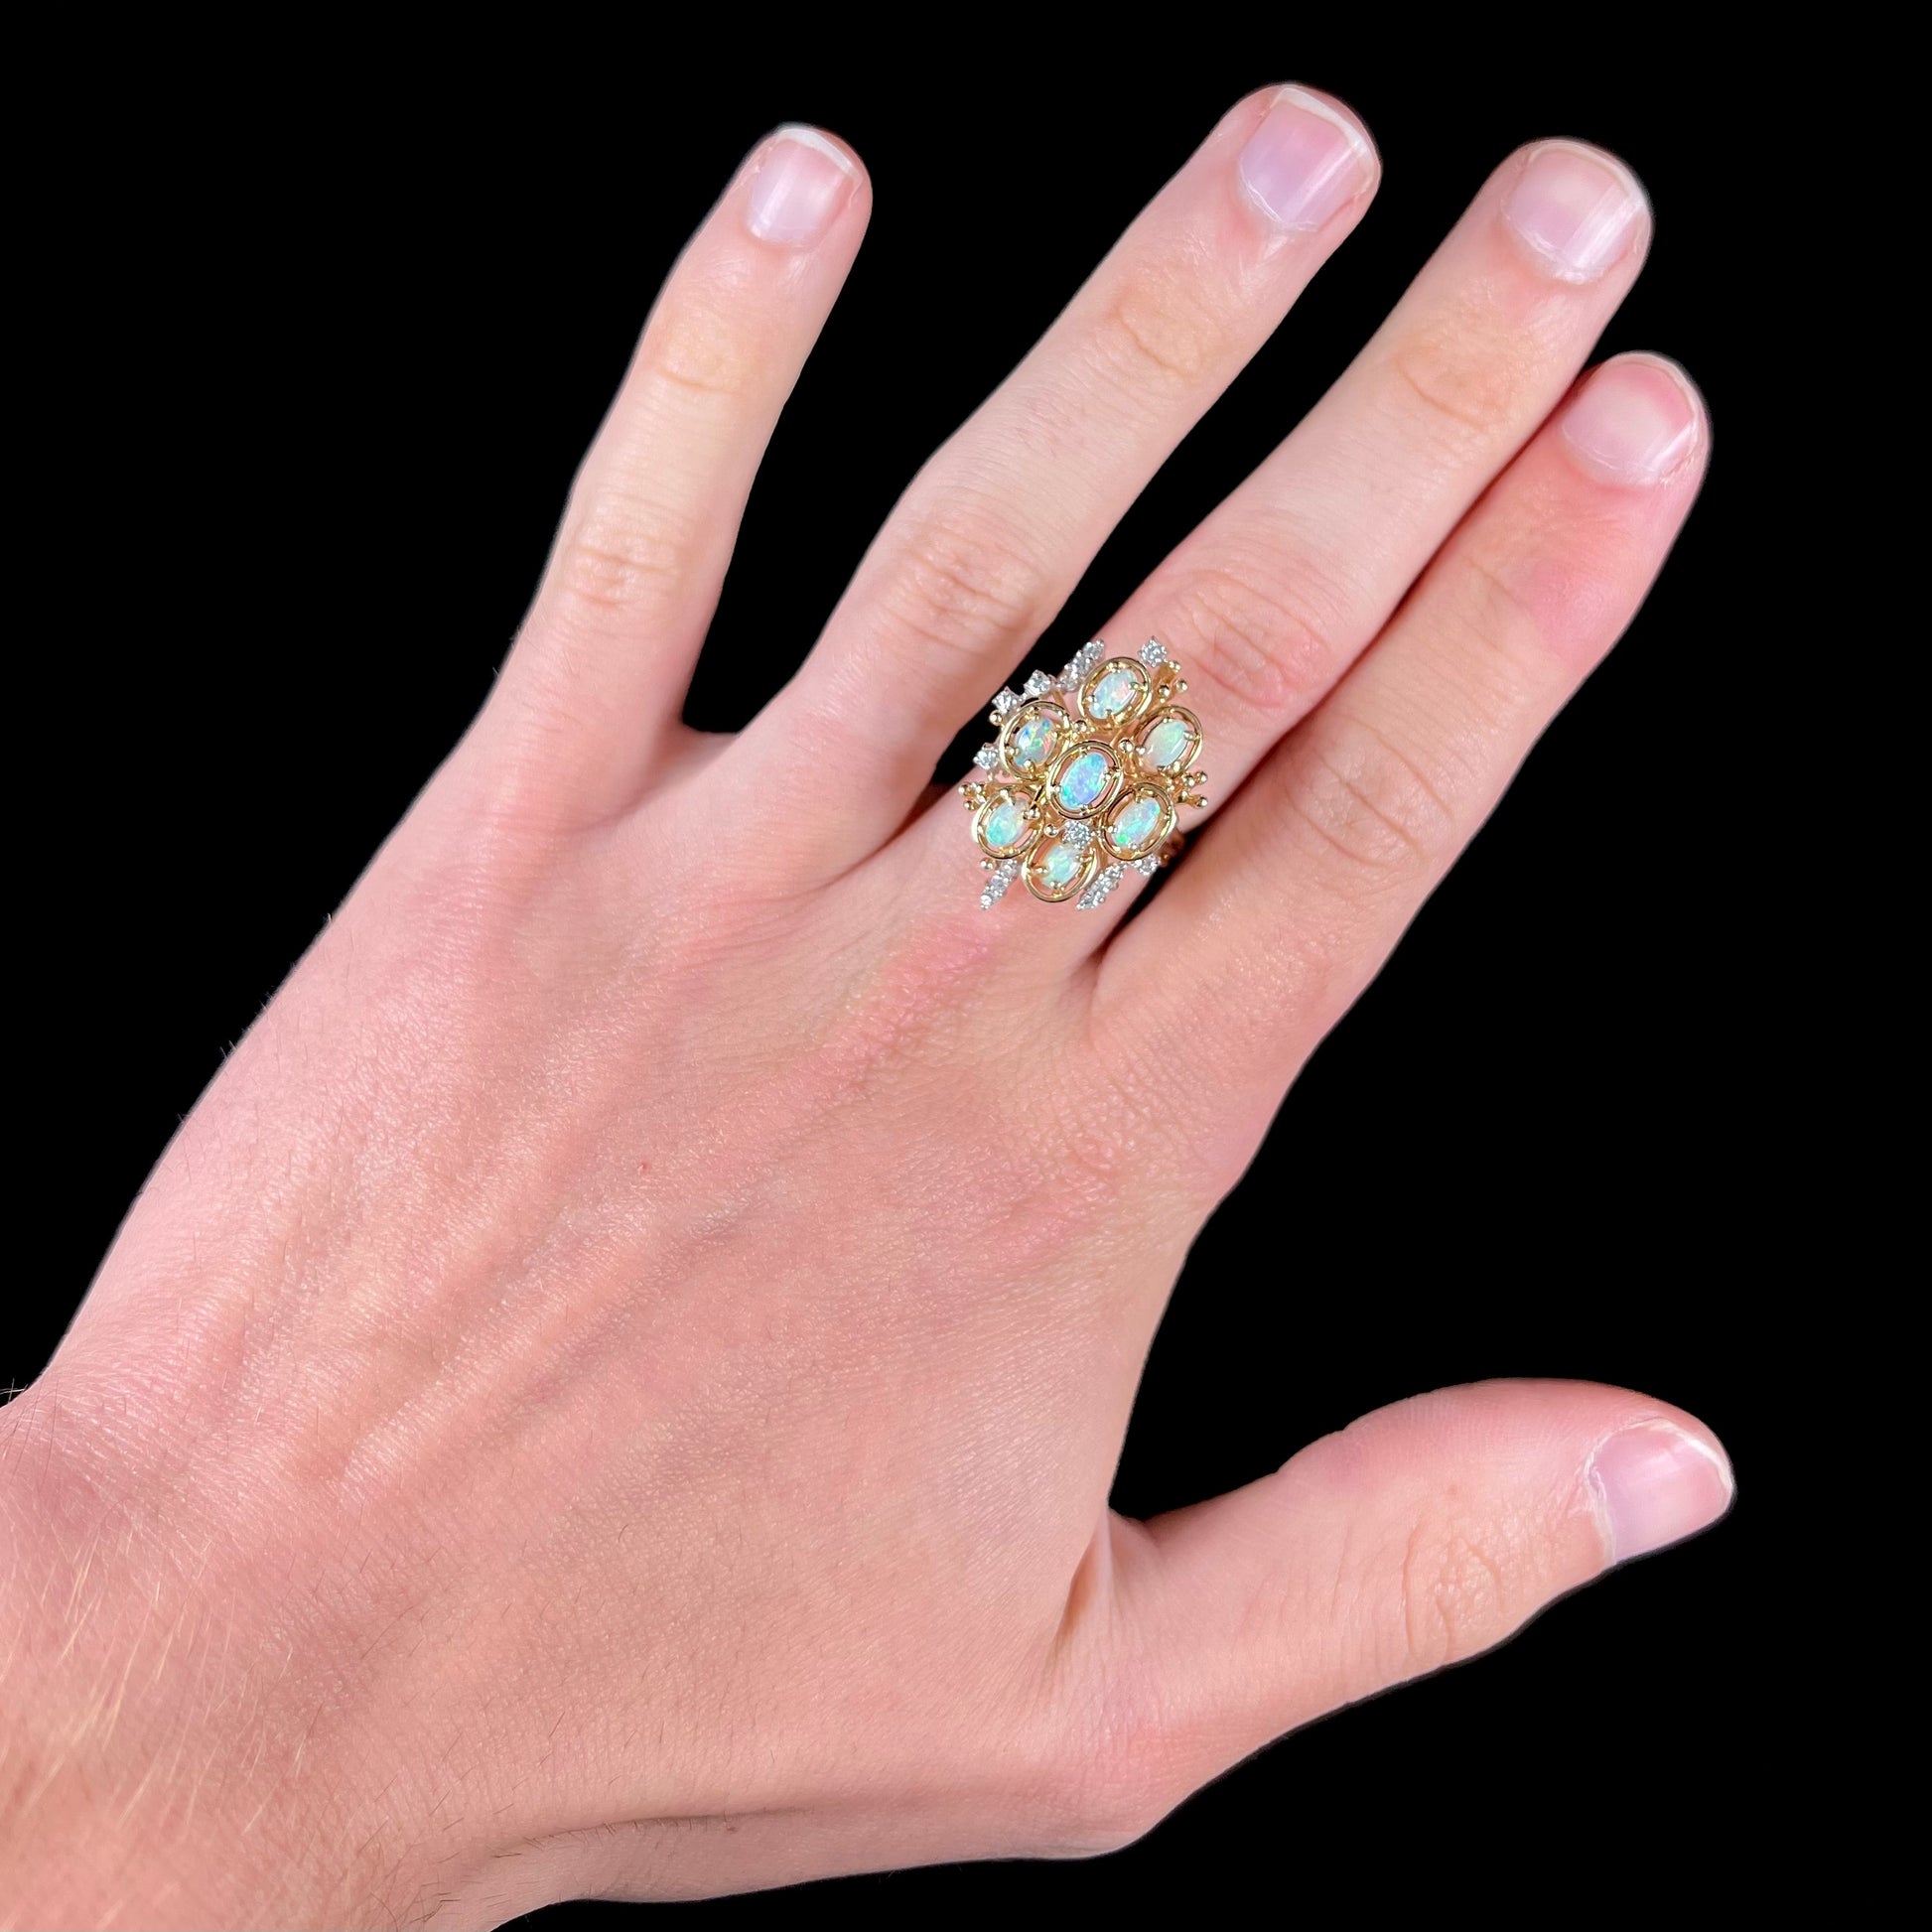 A ladies' vintage mid-century modern style opal and diamond cluster ring in yellow gold.